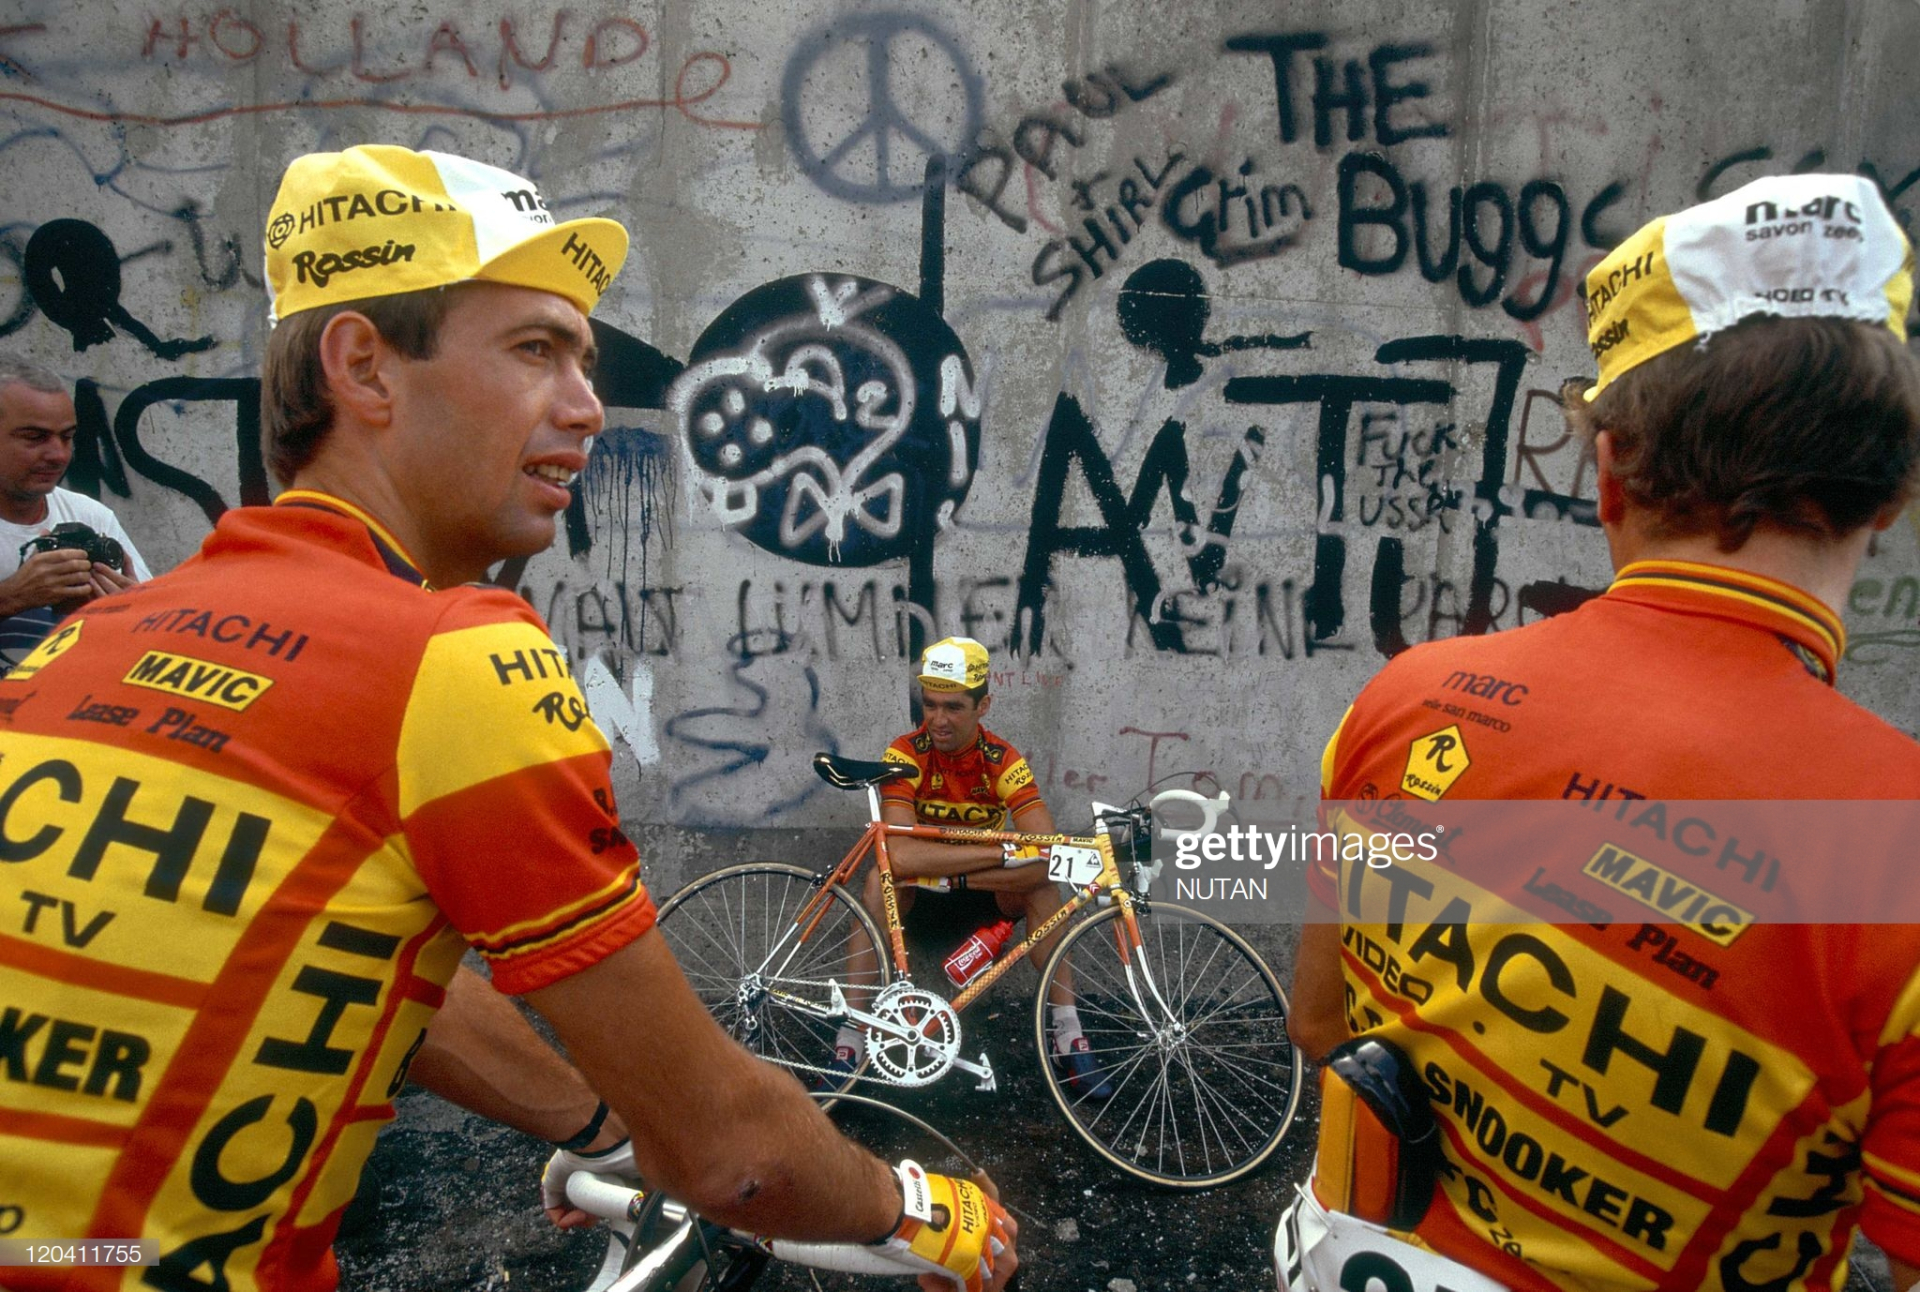 FRANCE - CIRCA 1987:  Tour de France, France in 1987.  (Photo by NUTAN/Gamma-Rapho via Getty Images)